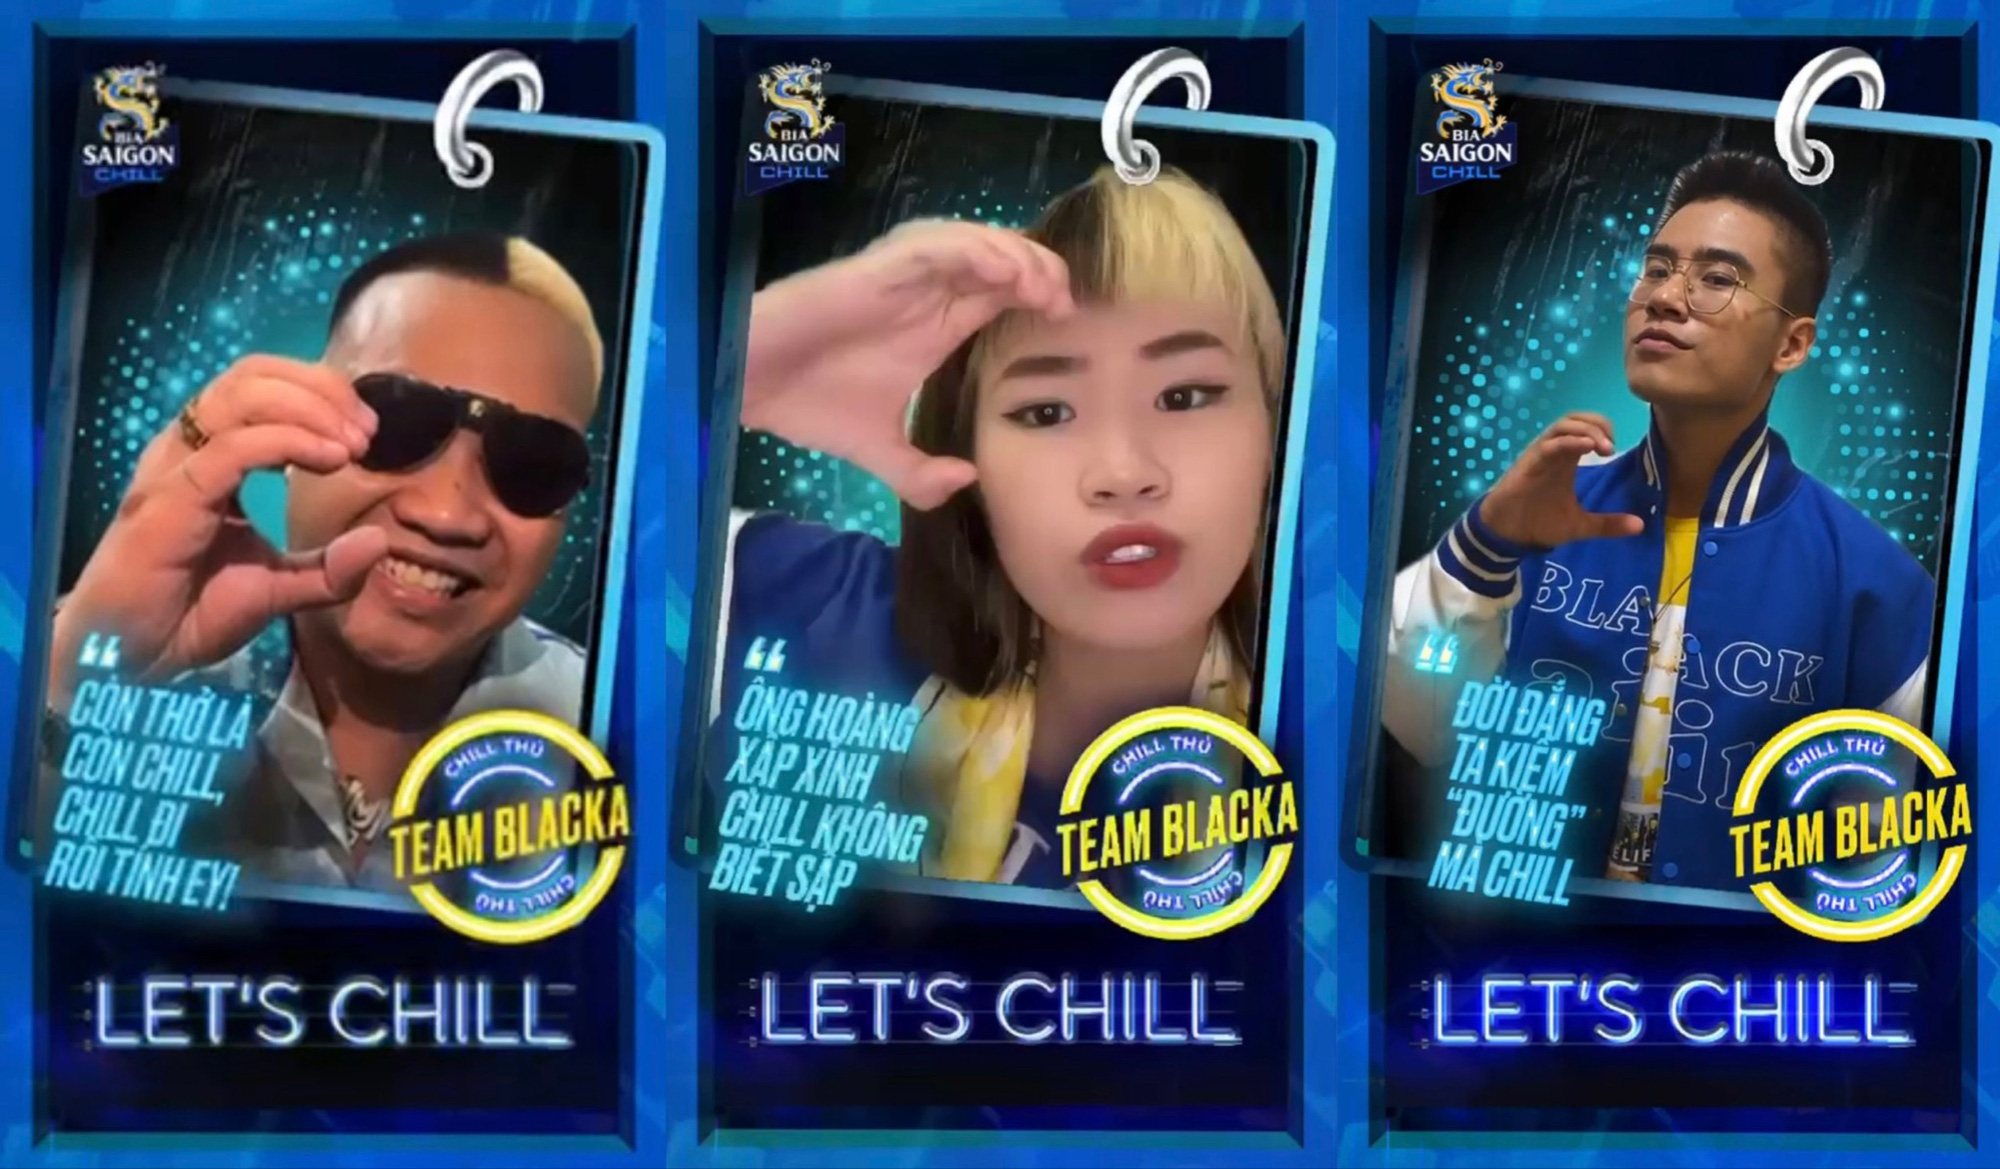 3 famous Vietnamese rappers Blacka, Tia, Ricky Star with the message 